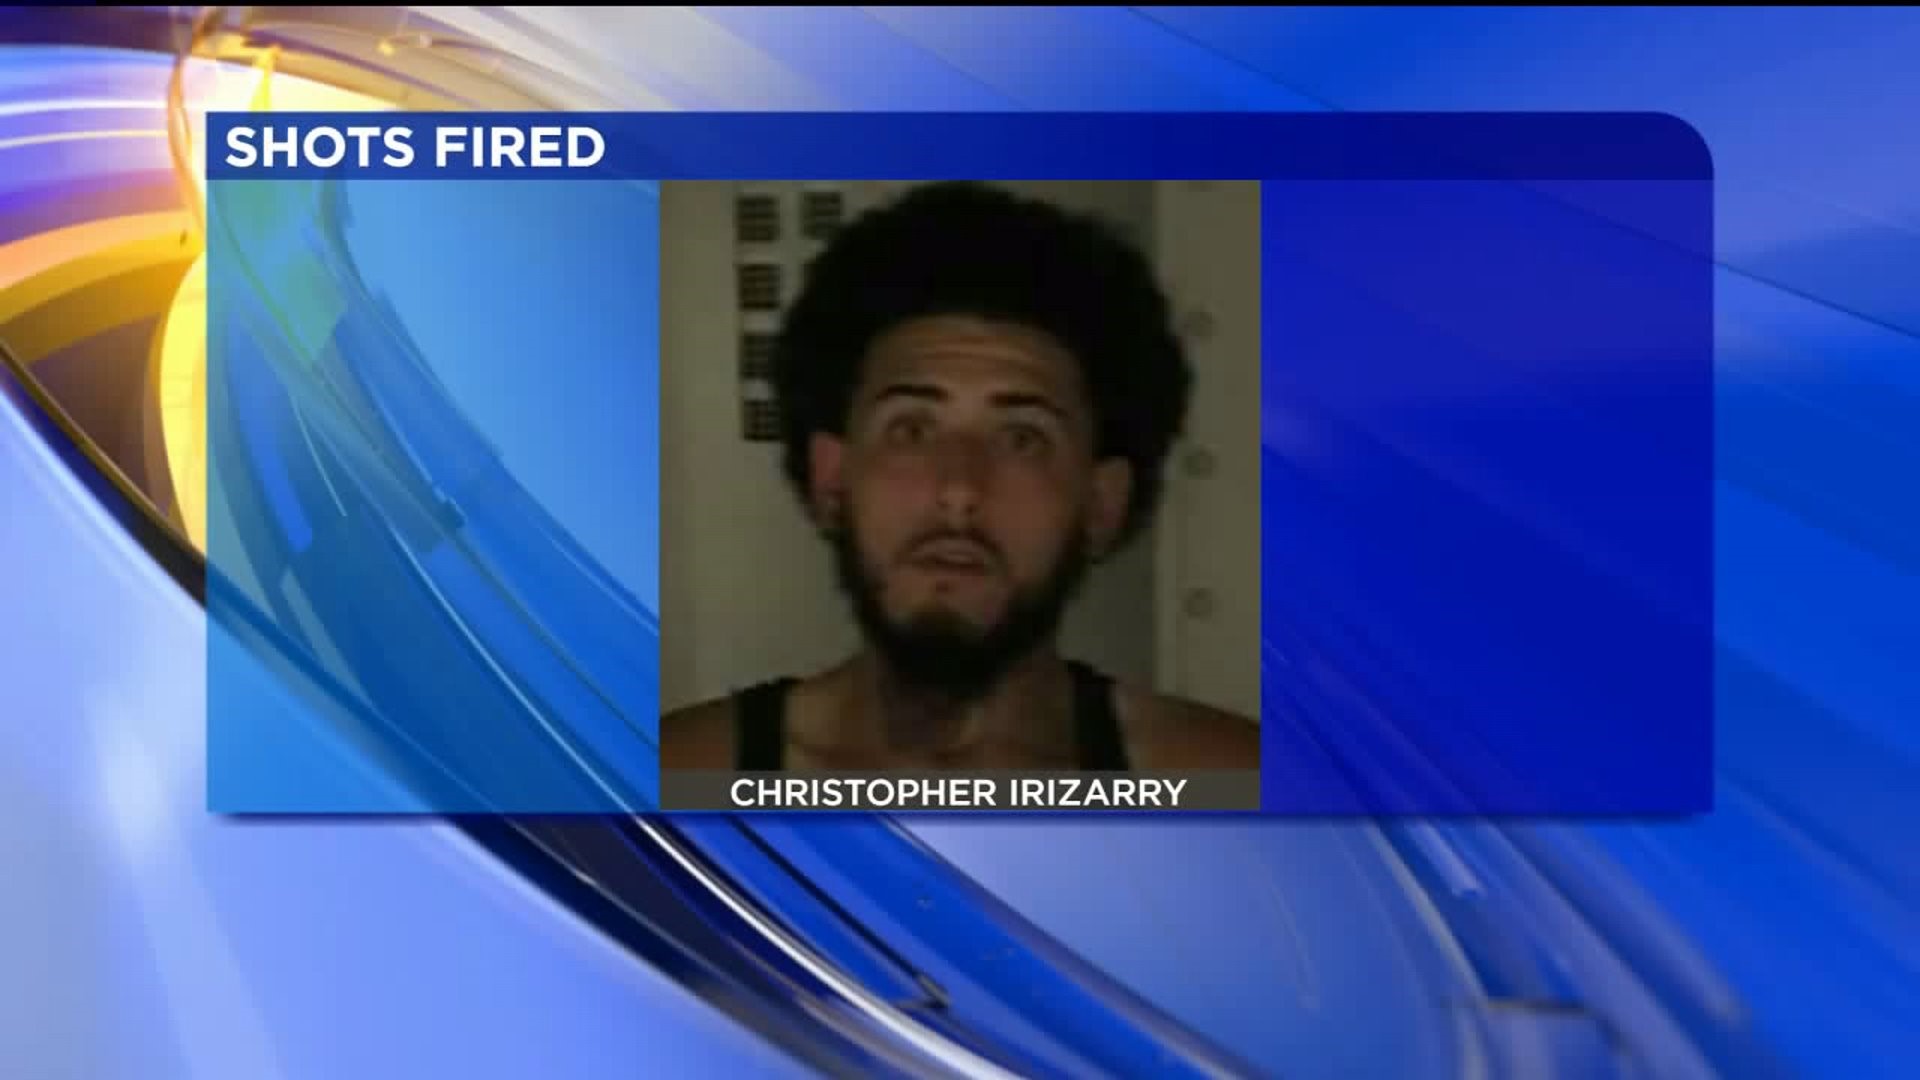 Man Charged After Shots Fired in Hazleton